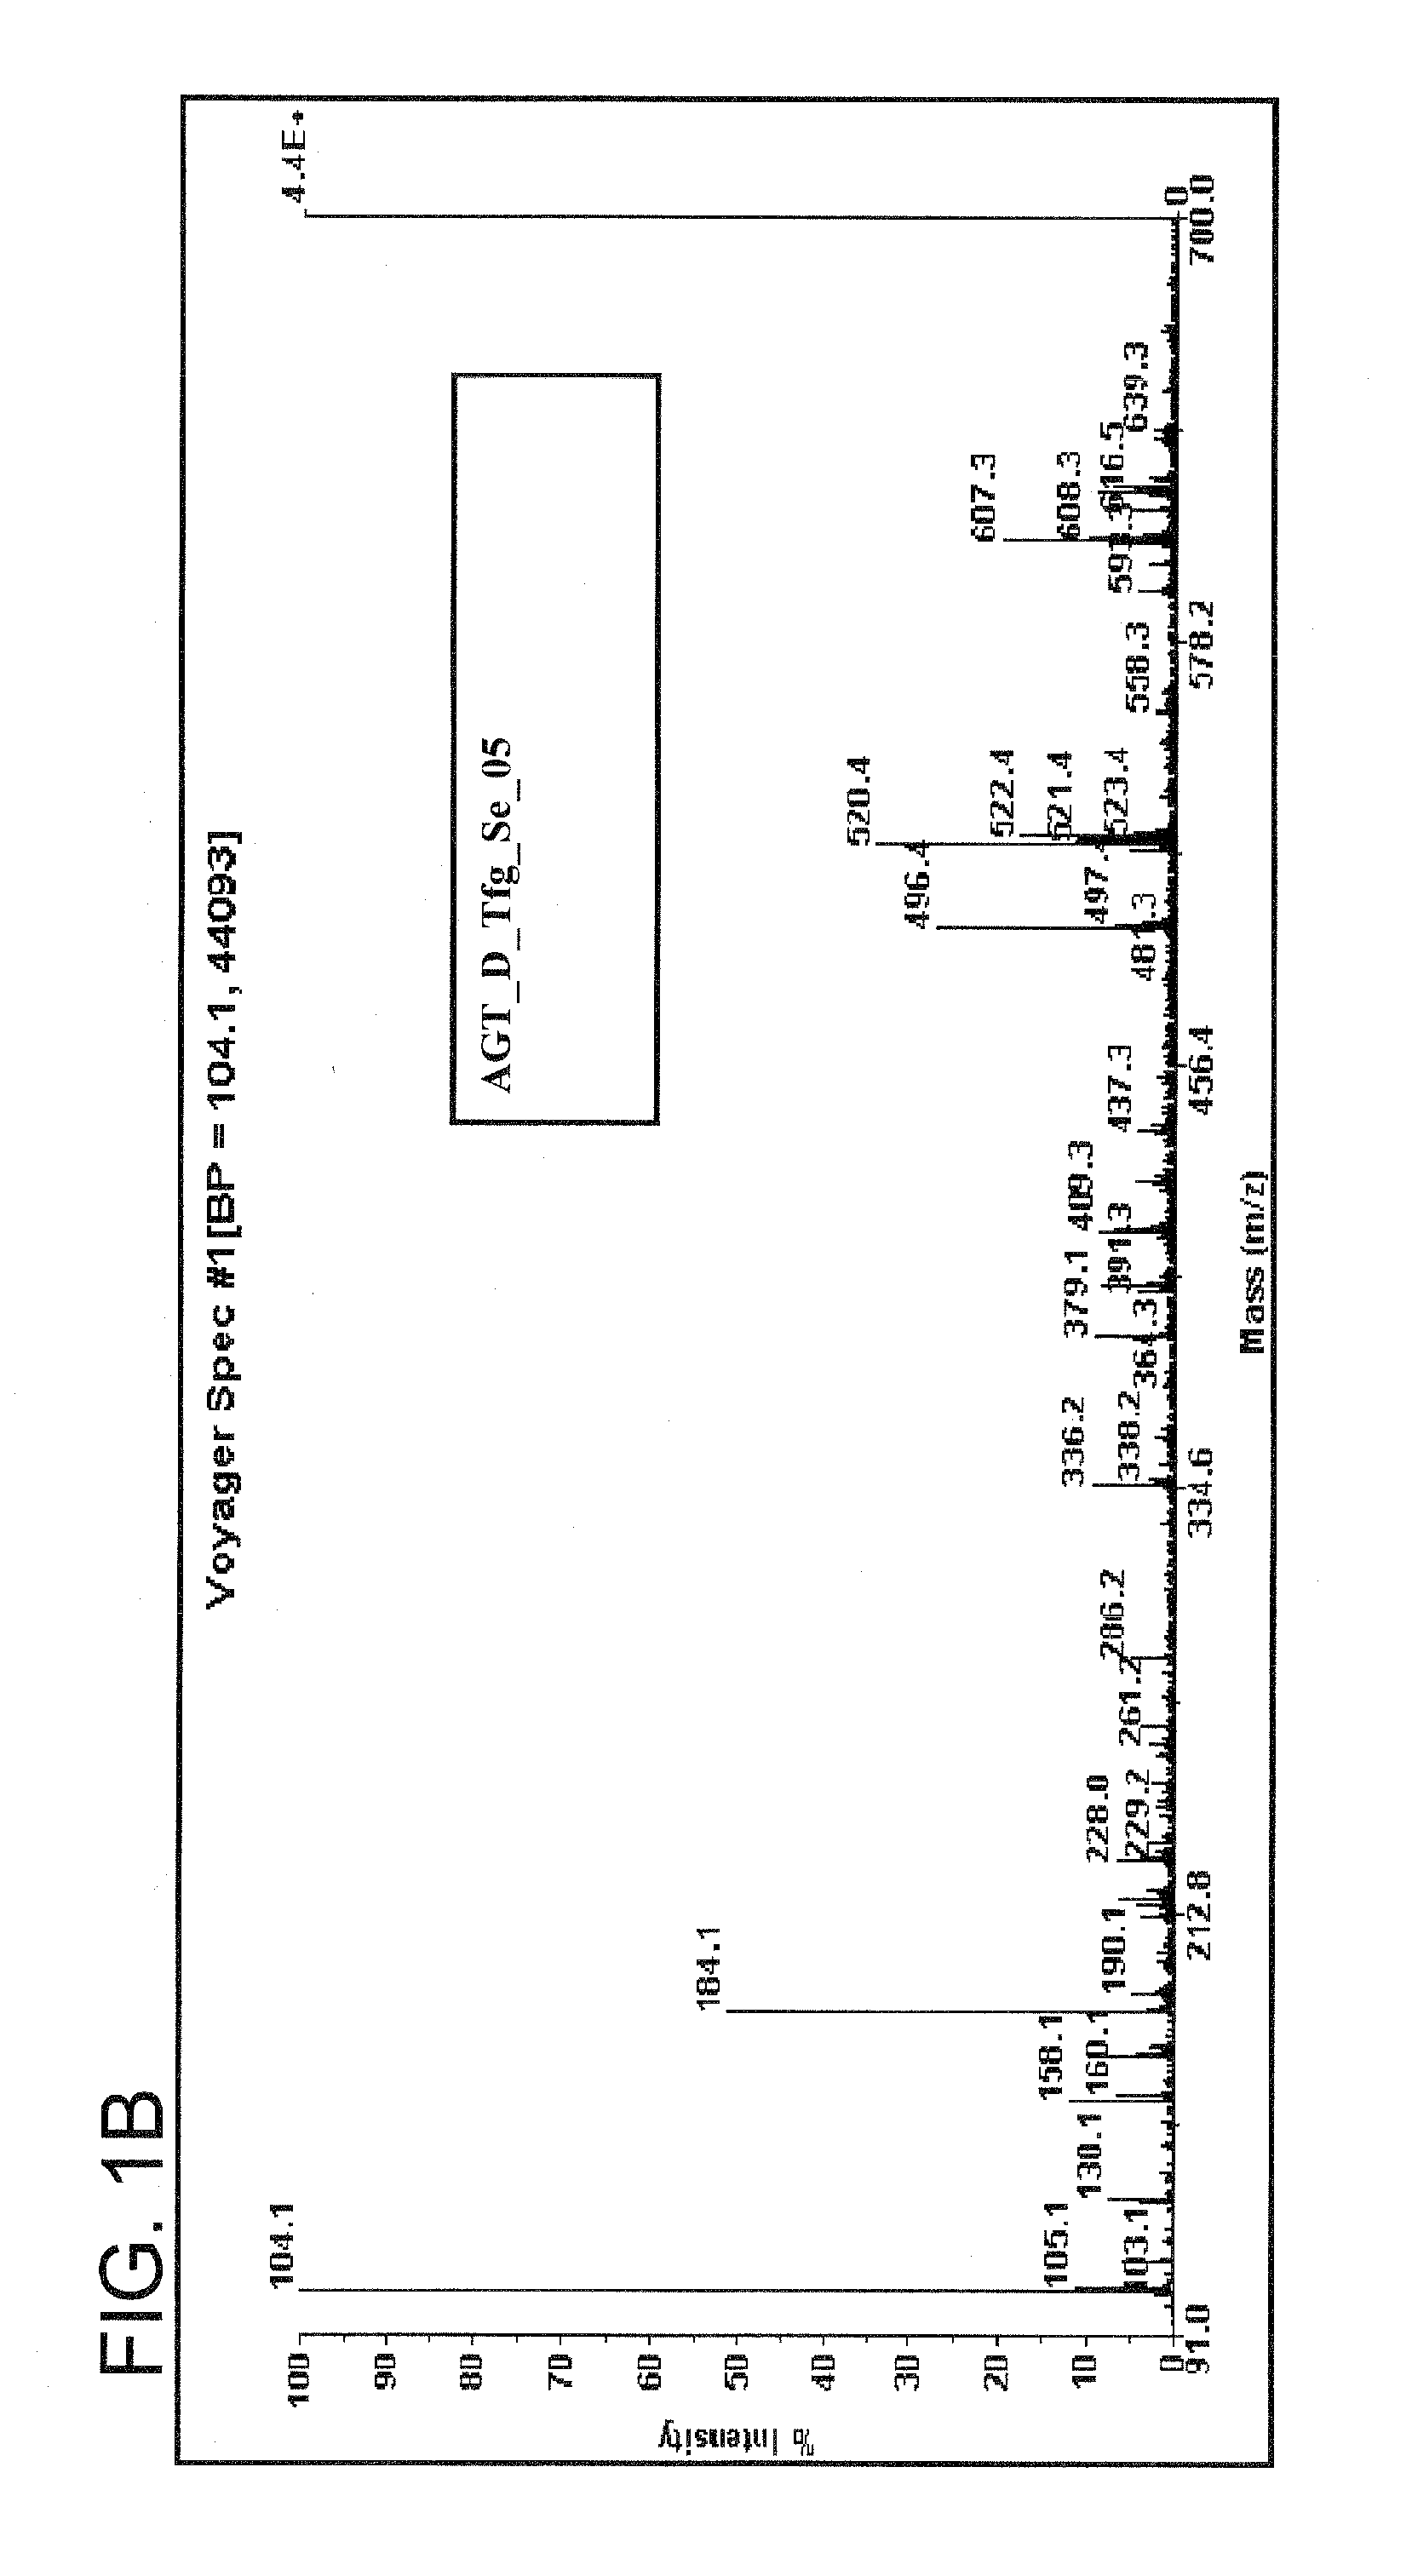 Screening Method (Metabolite Grid) for Therapeutic Extracts and Molecules for Diabetes